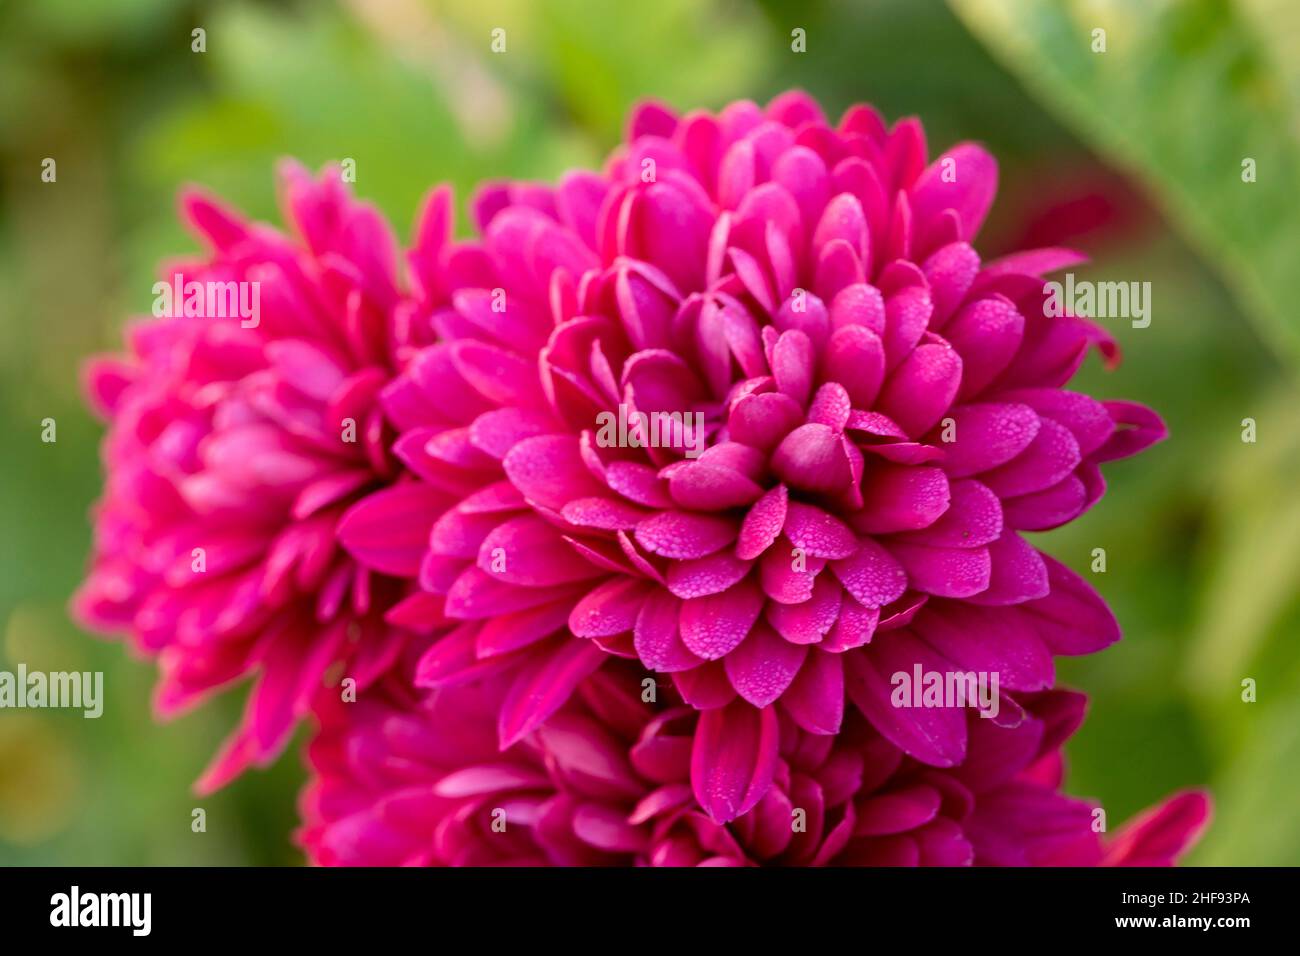 Blooming Chrysanthemums, natural close-up flower portraits Stock Photo